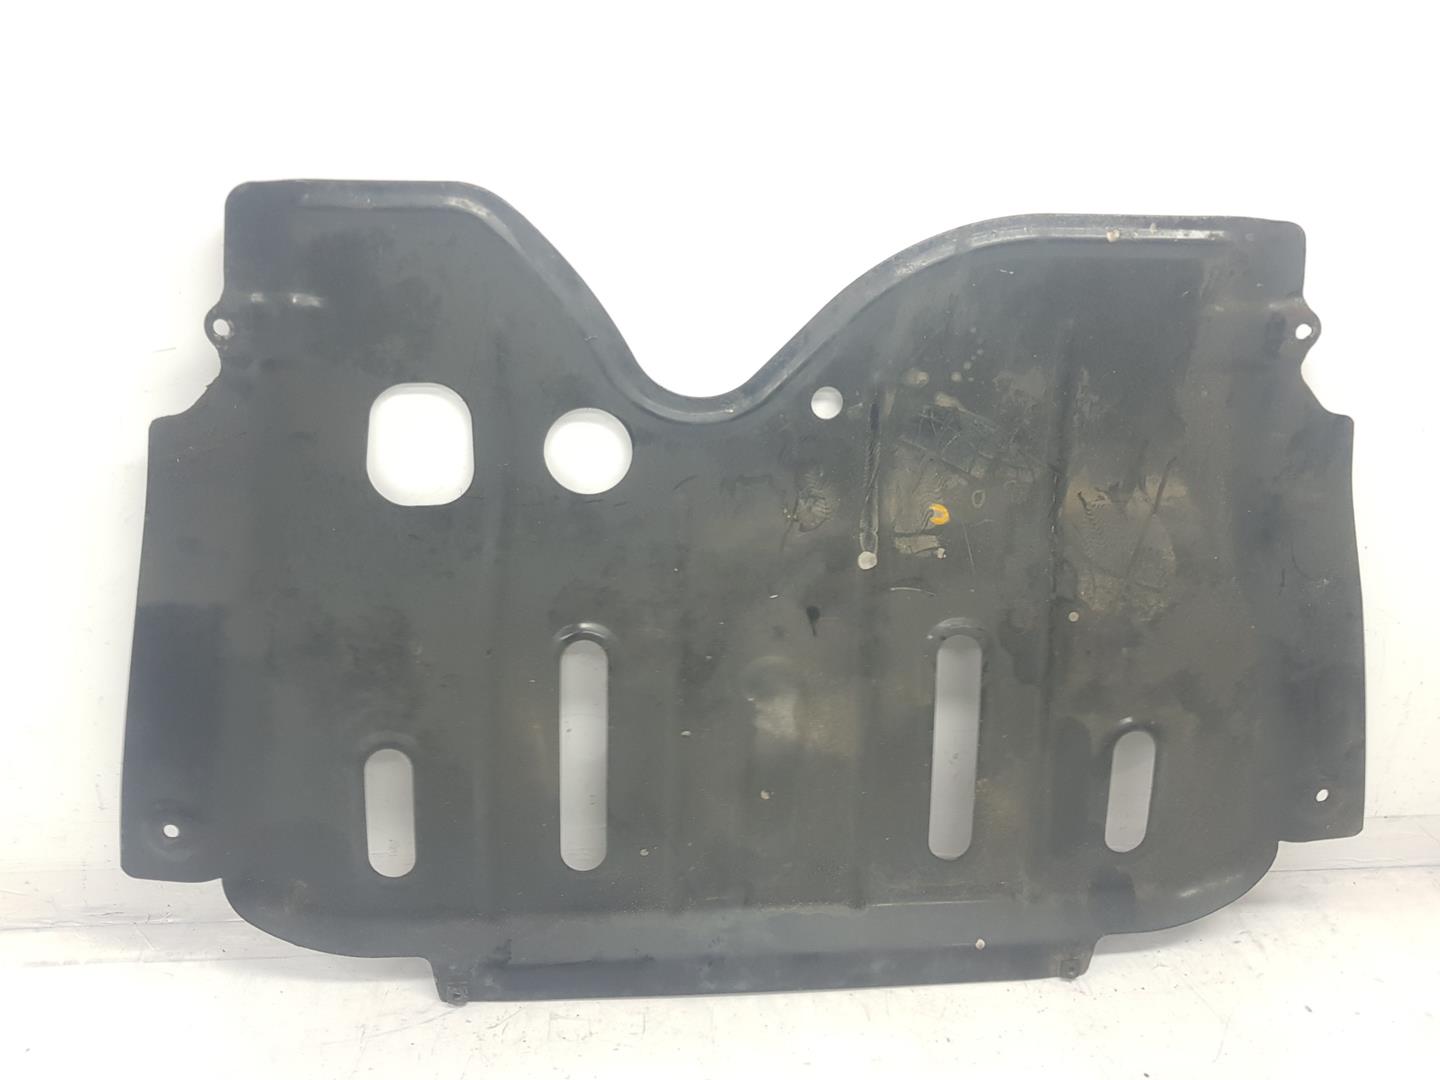 CHEVROLET Cruze 1 generation (2009-2015) Front Engine Cover 95459793, 95459793 23799233